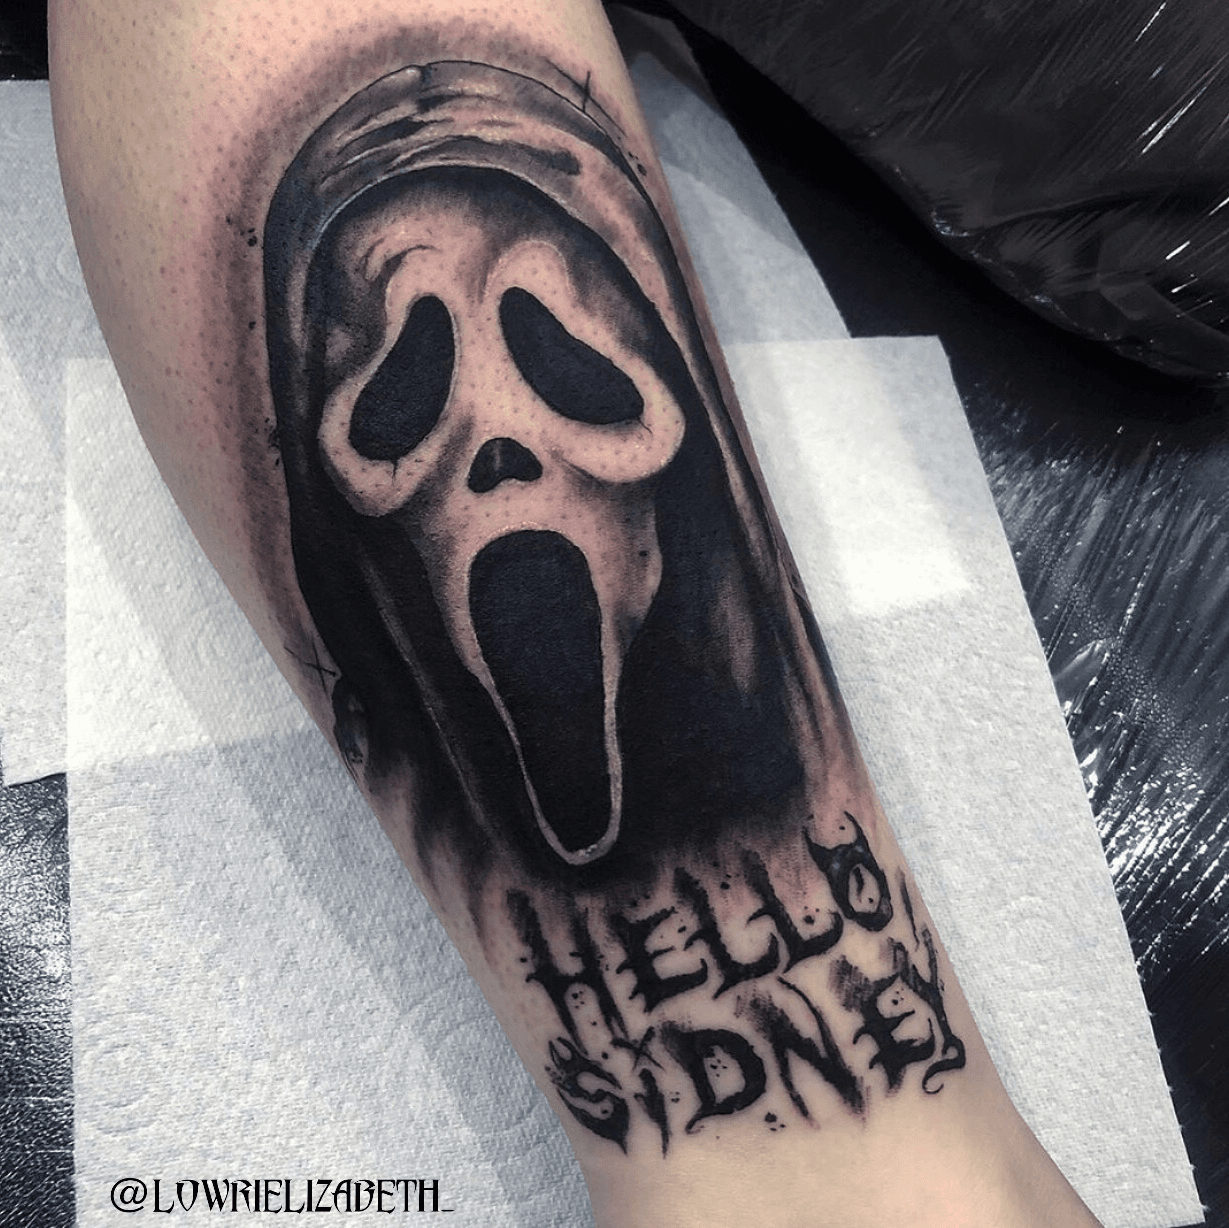 Tattoo of screaming hand by Jim Phillips